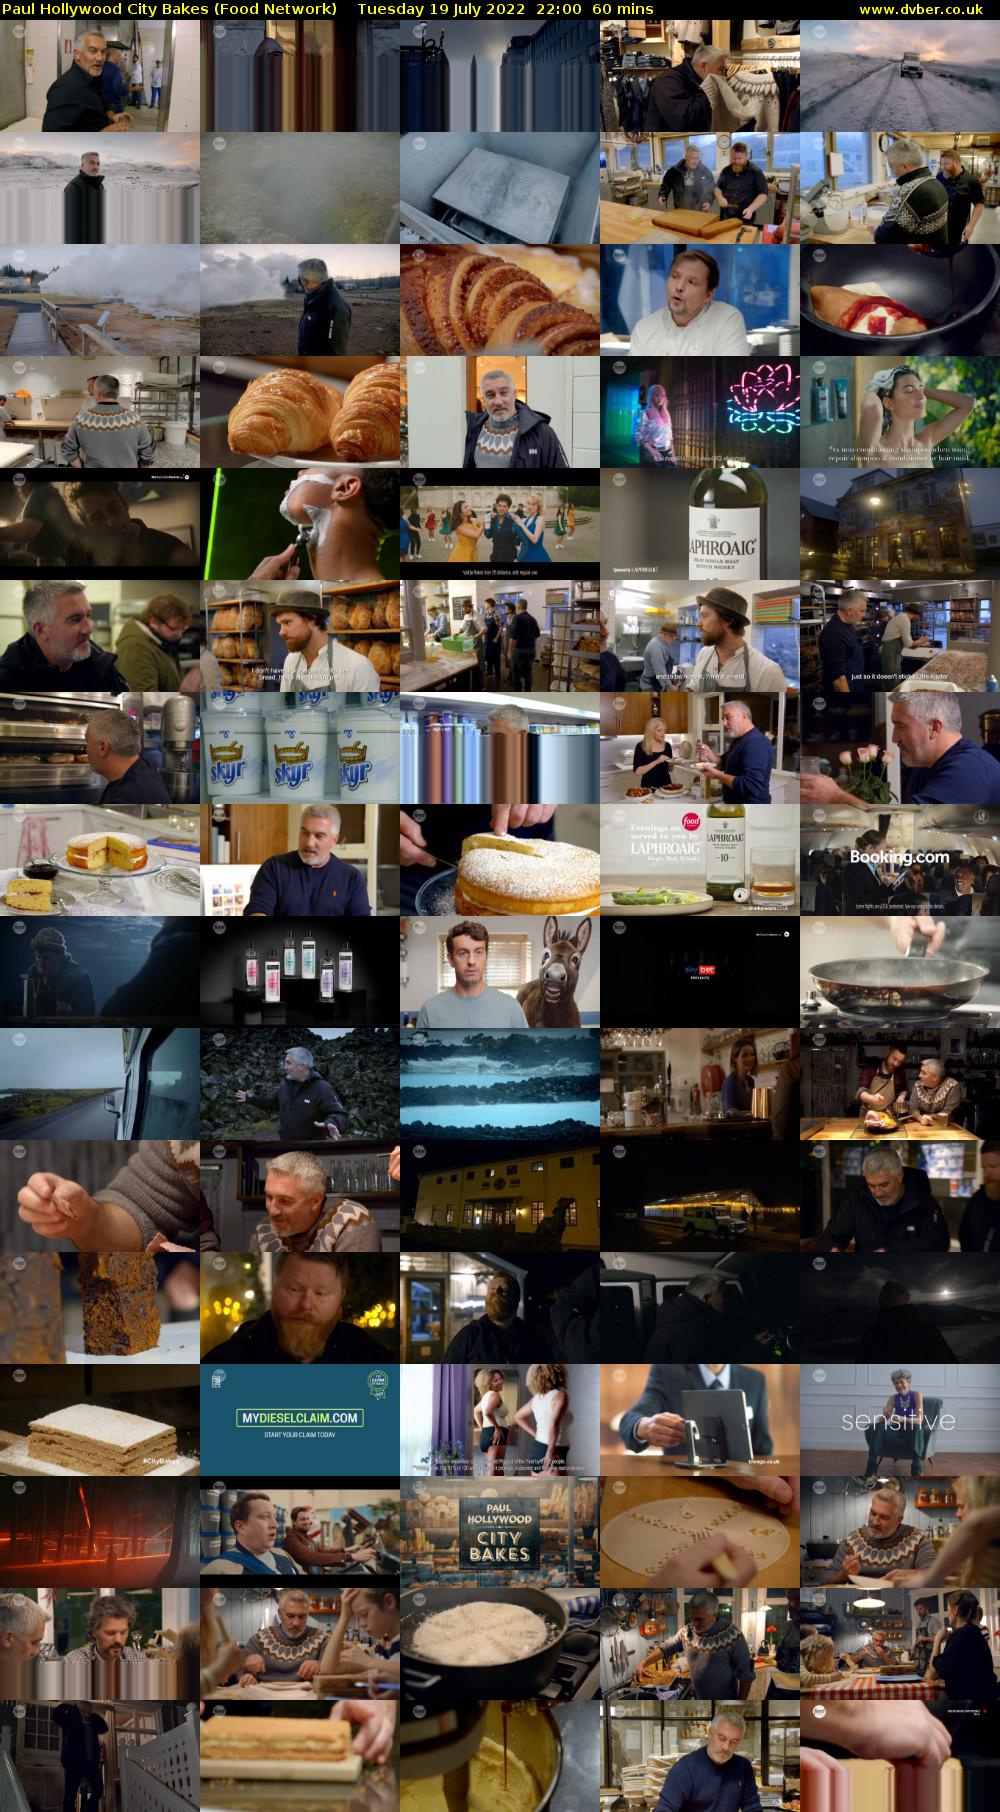 Paul Hollywood City Bakes (Food Network) Tuesday 19 July 2022 22:00 - 23:00